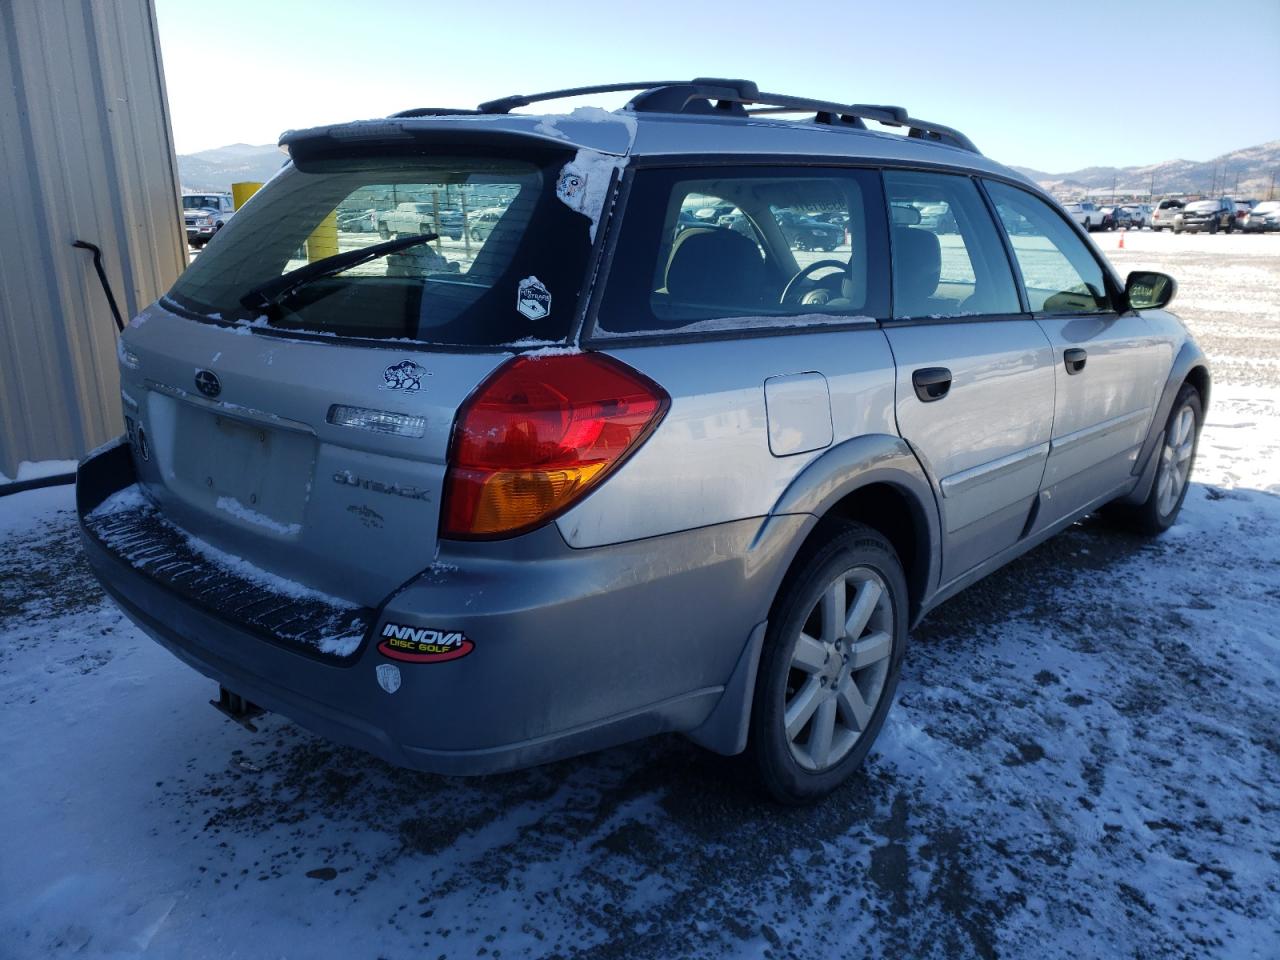 2006 SUBARU LEGACY VIN 4S4BP61C367353893 from the USA